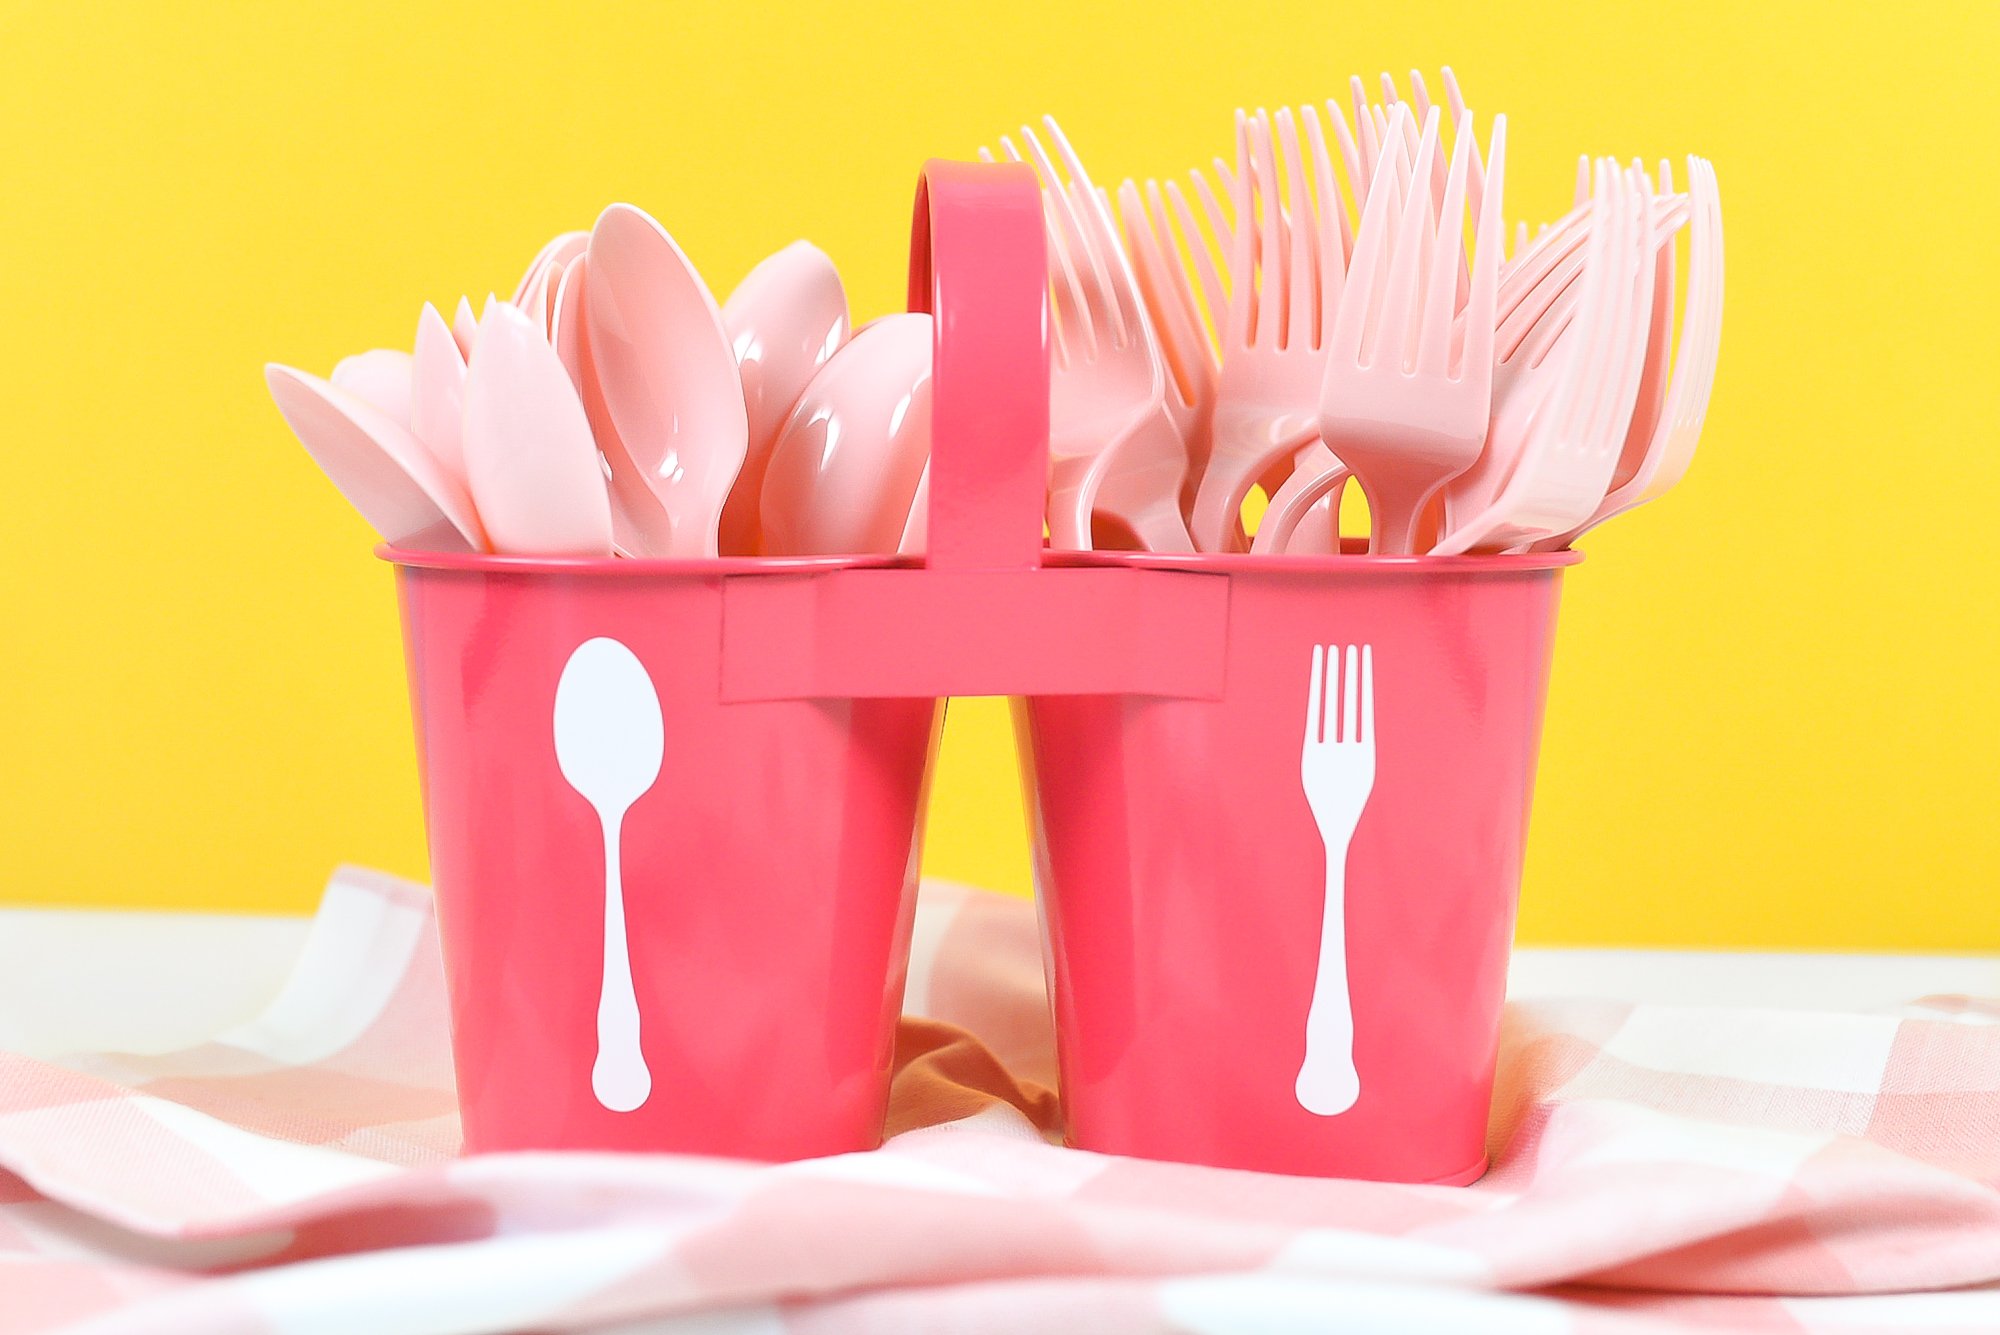 Pink utensil caddy with white spoon and for decals, filled with pink plastic forks and spoons on a yellow background.